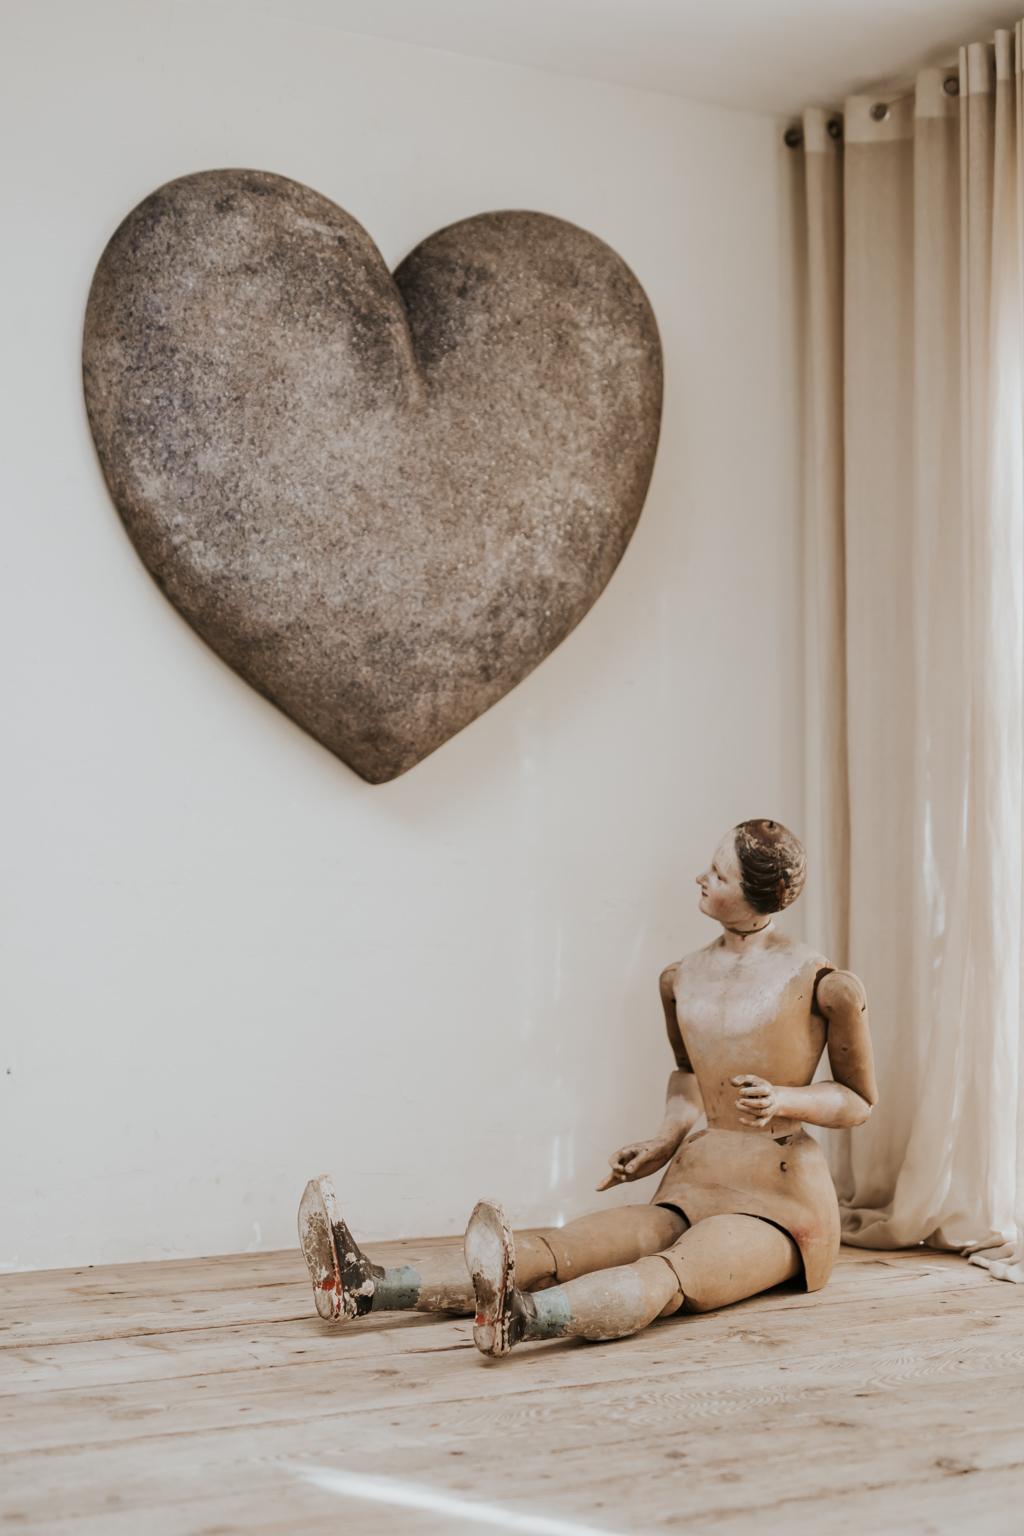 This extra large heart was created in my workshop, a wonderful decorative object,
that fits in every house, you have to feel it to be convinced it isn't real stone,
the material is wood, we painted it fausse pierre/imitation stone.